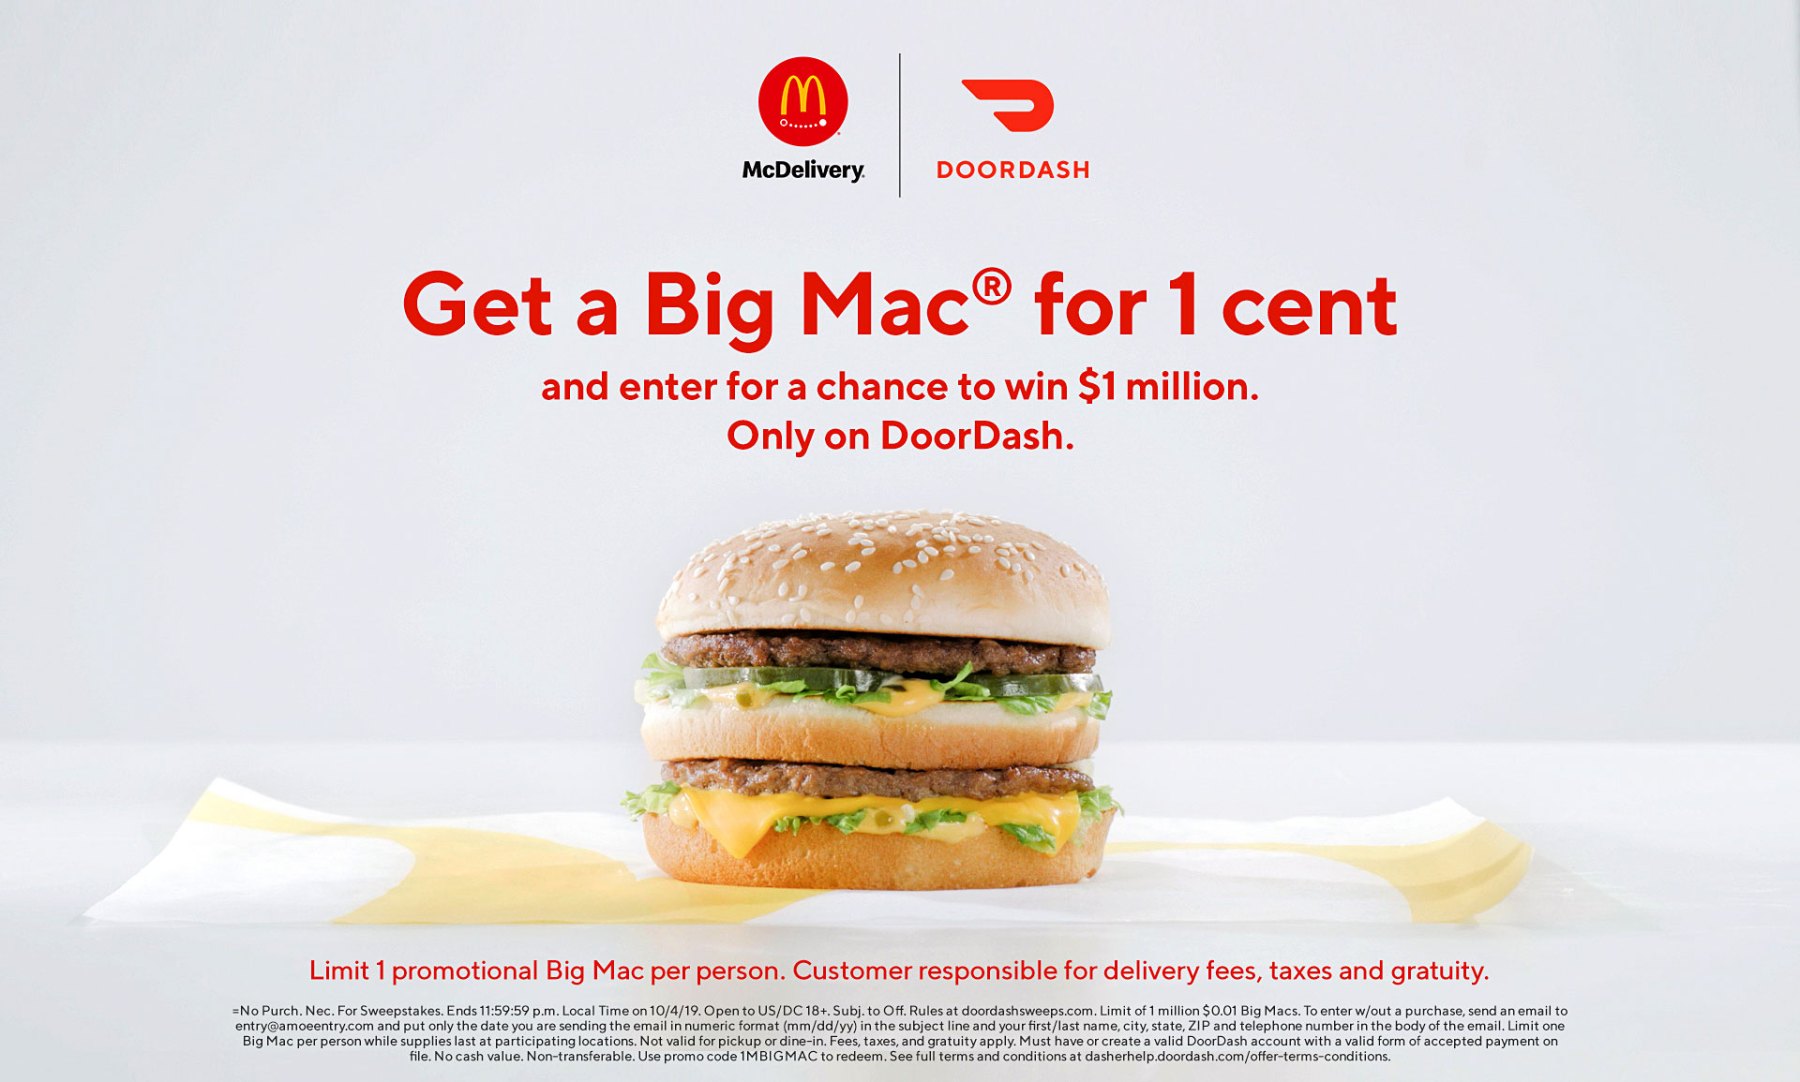 DoorDash Is Selling Big Macs for a Penny, Giving Away 1 Million Us